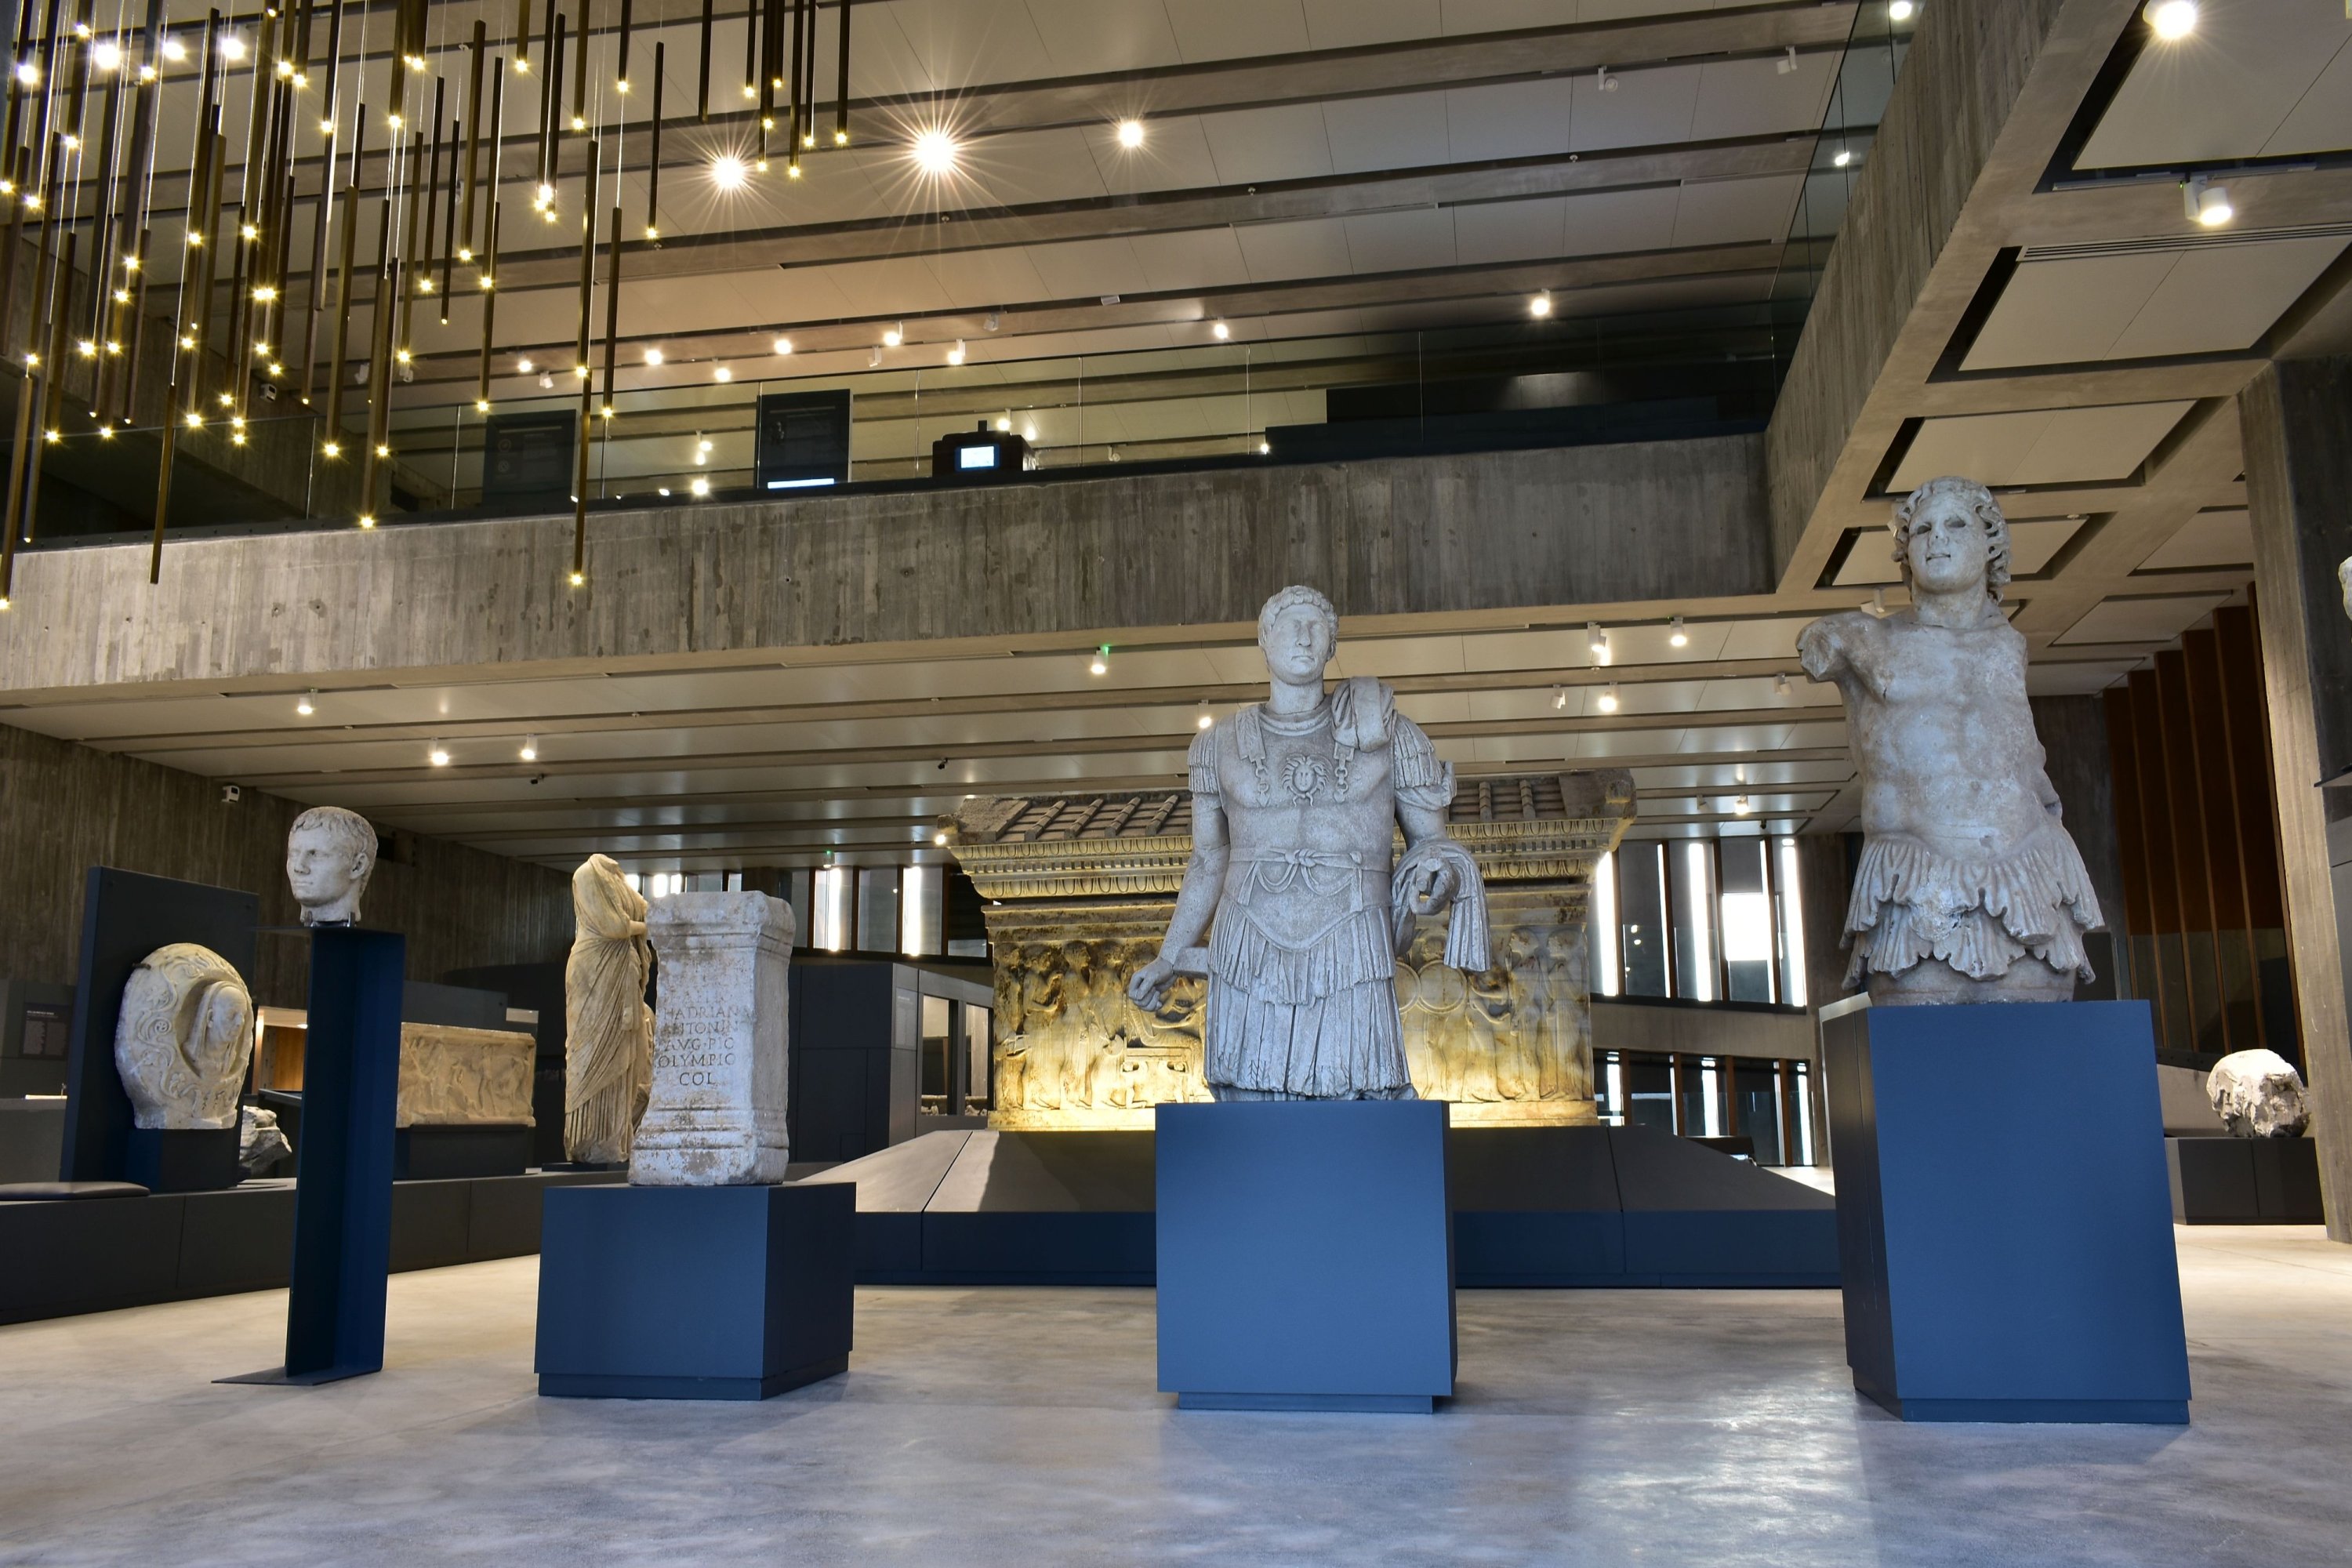 A selection of statues found during the excavation of the ancient city of Troy is on display at the museum. (Courtesy of Troy Museum)